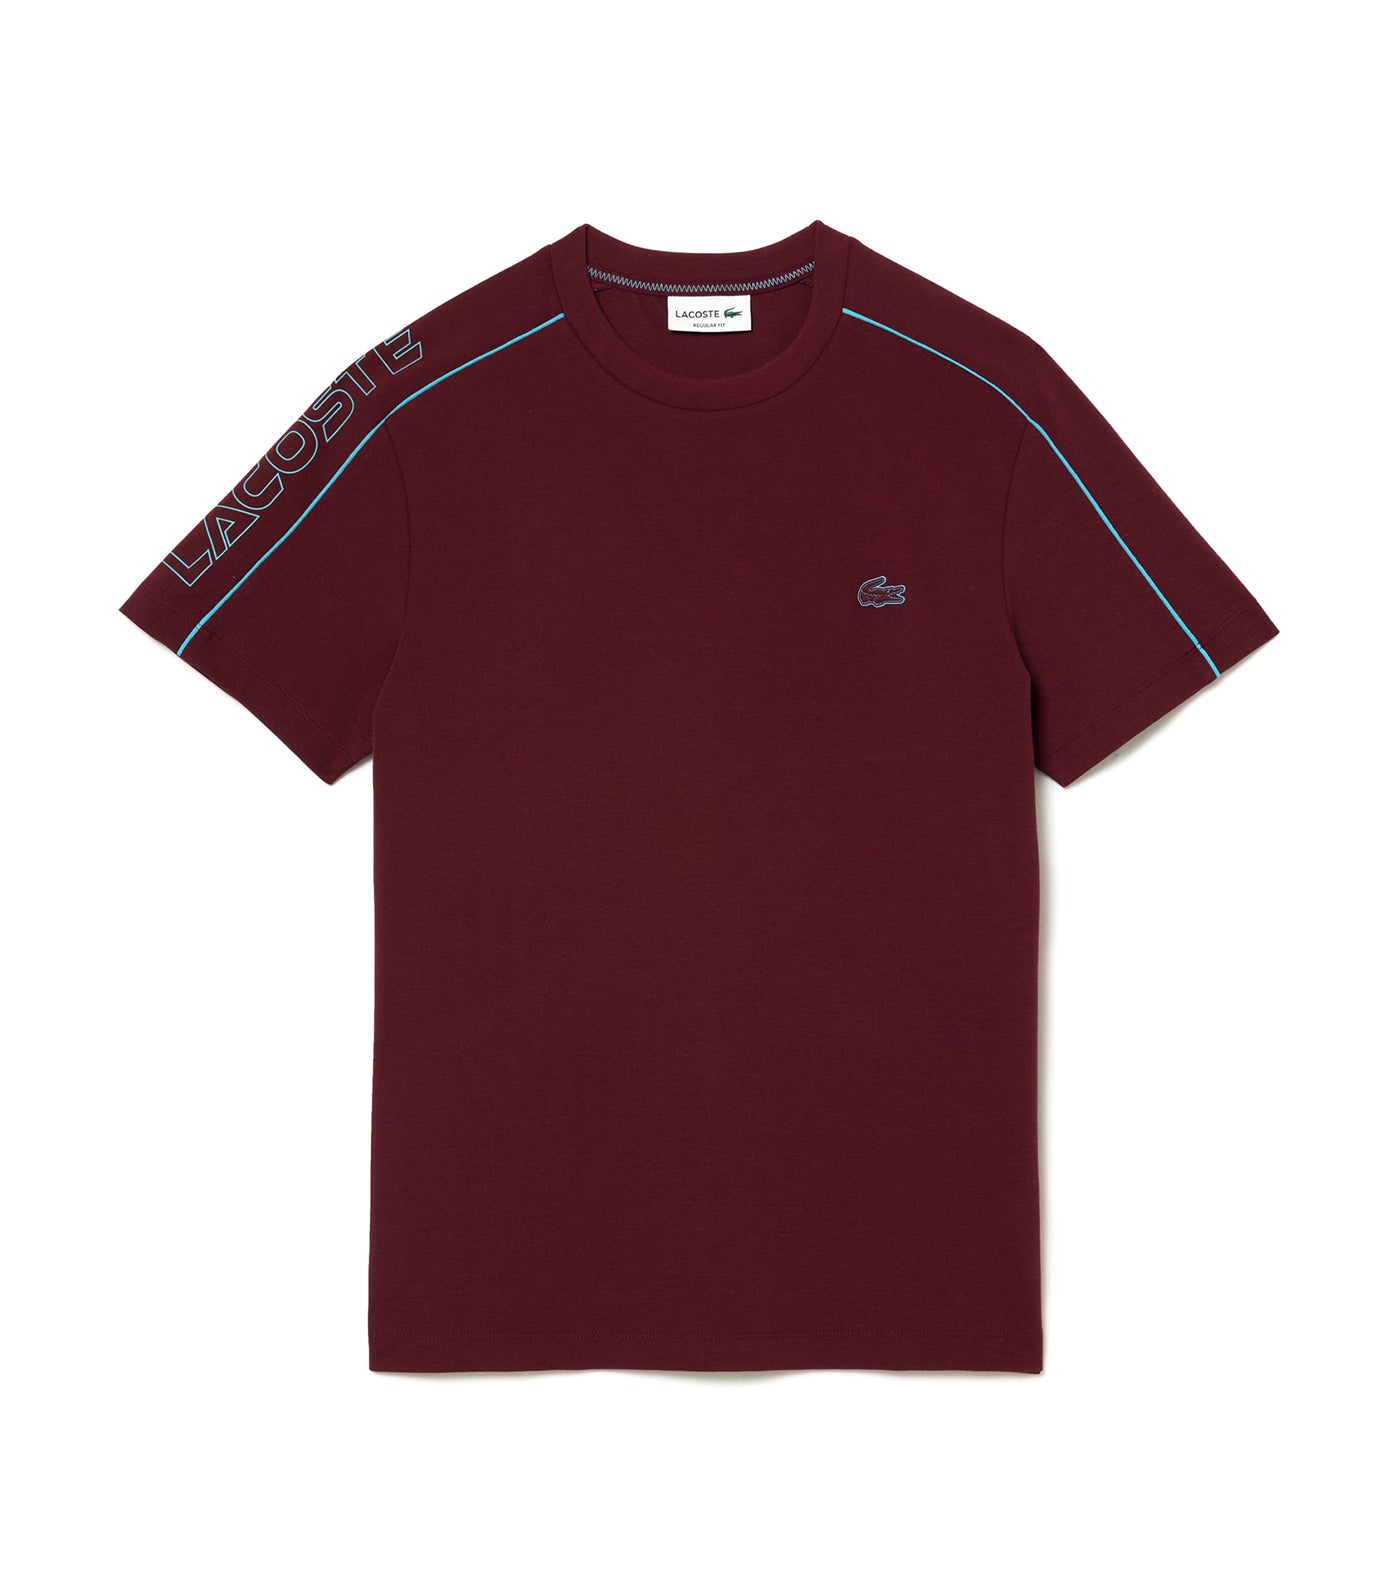 Contrast Accent Lacoste Branded T-Shirt Zin/Cove